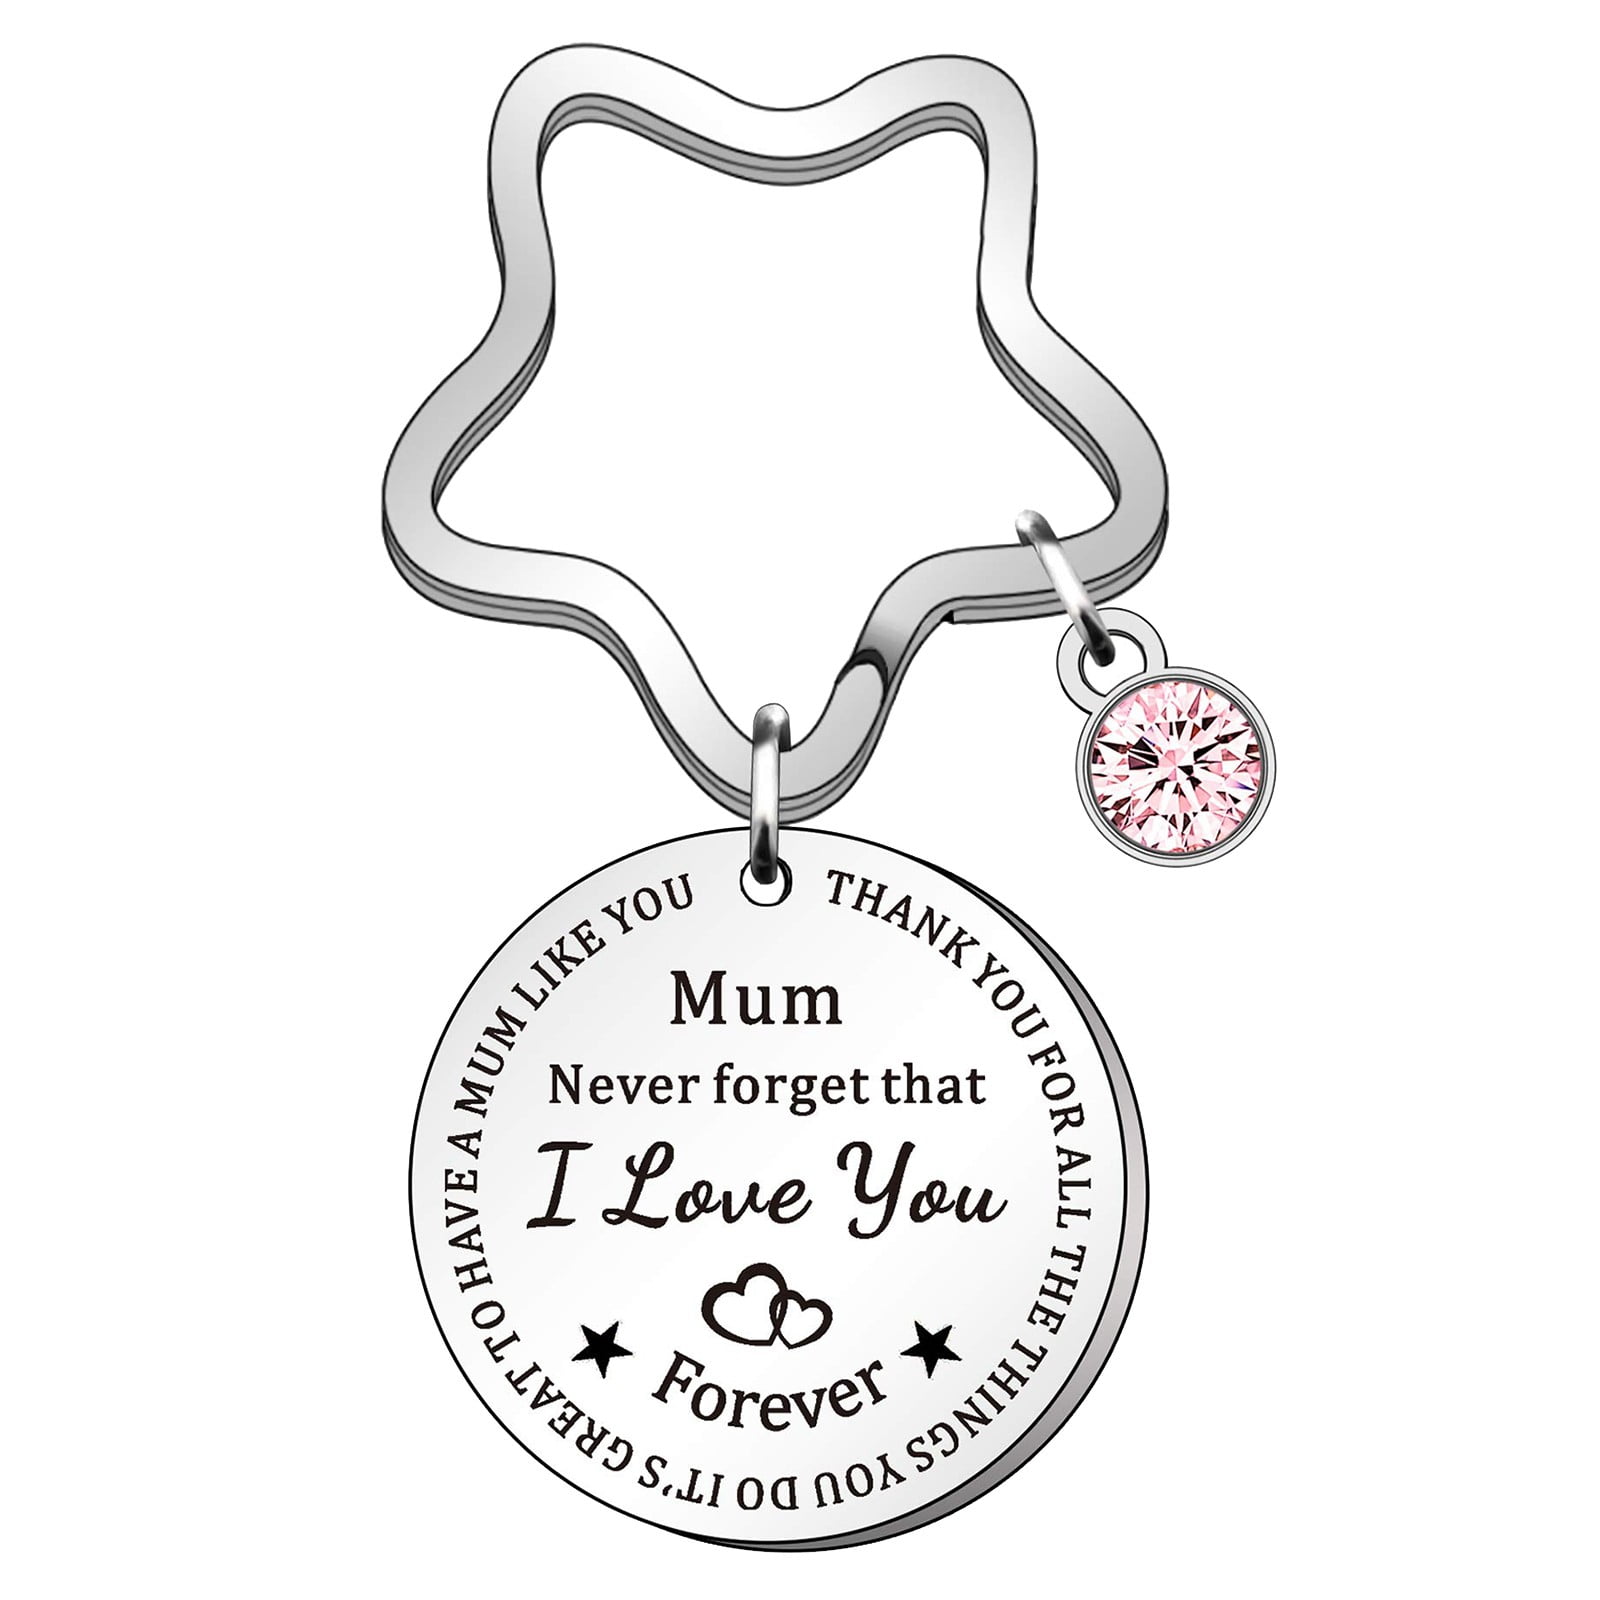 Quote Engraved Pendant Keyring Tags To My Wonderful Granddaughter Who Has Shown Me Granddaughter Inspirational Keychain Gift